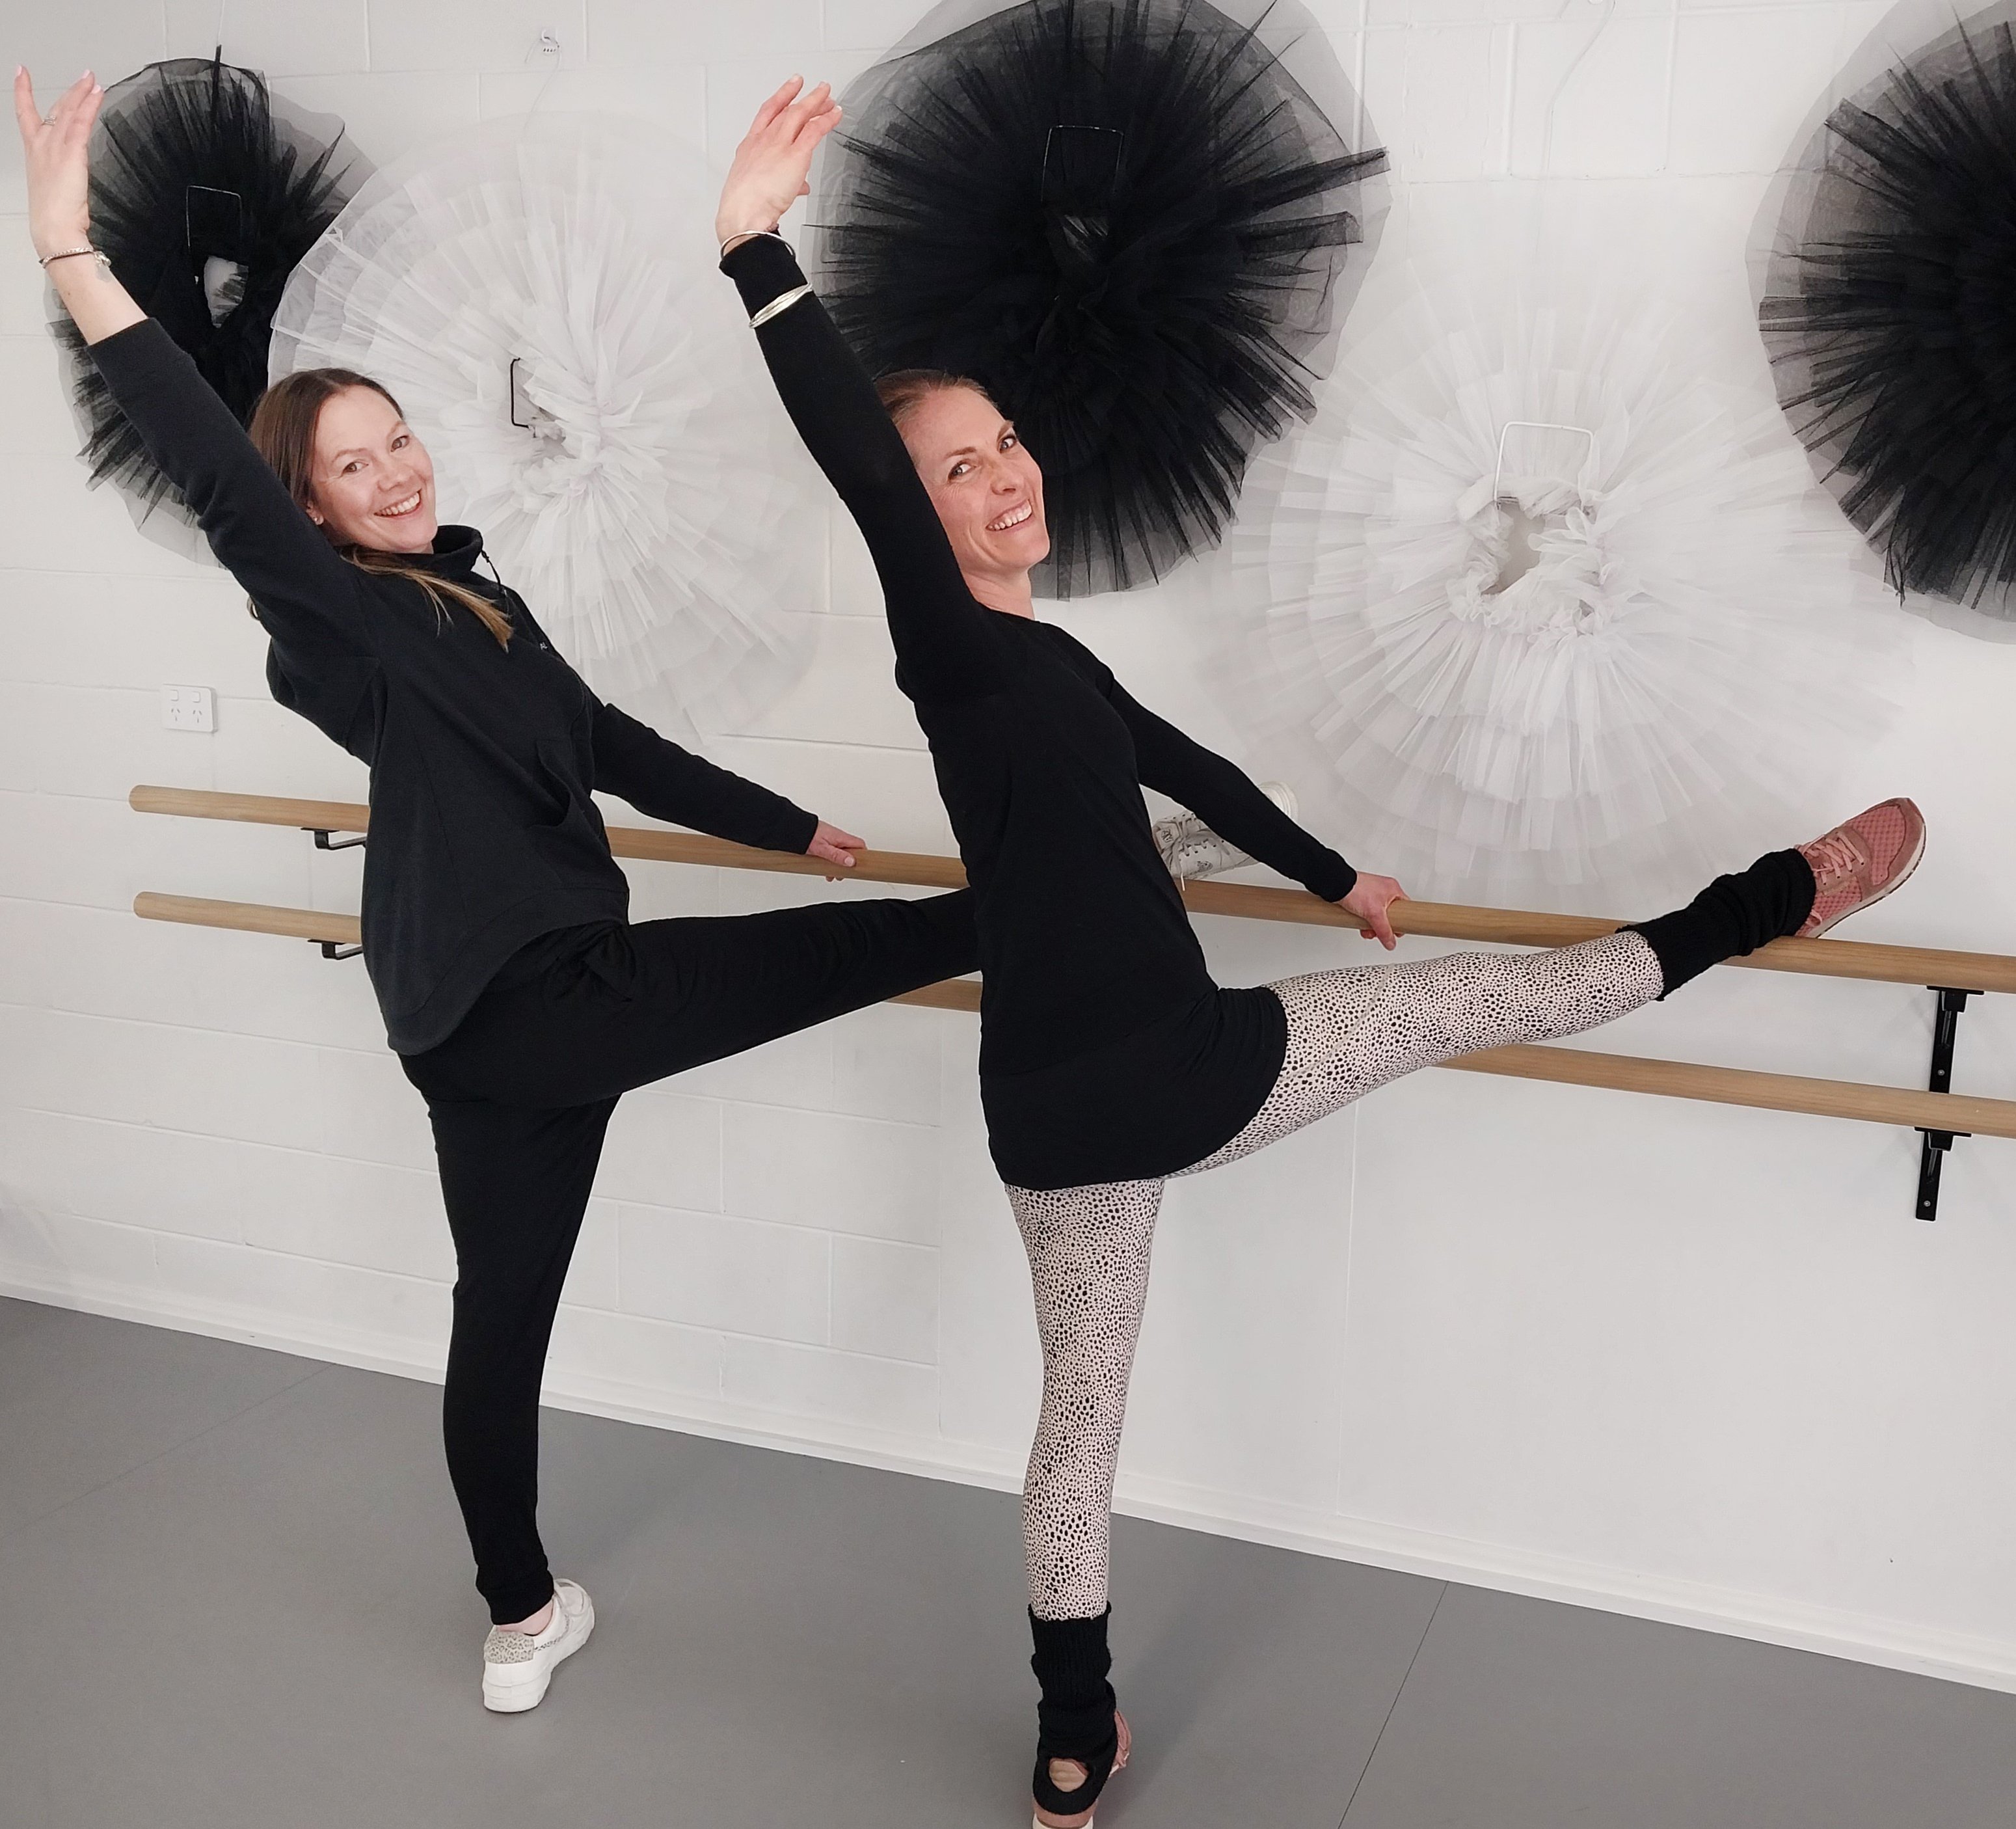 Briony Martin (left) and Kirsty Taylor performed in the Royal New Zealand Ballet’s production of...